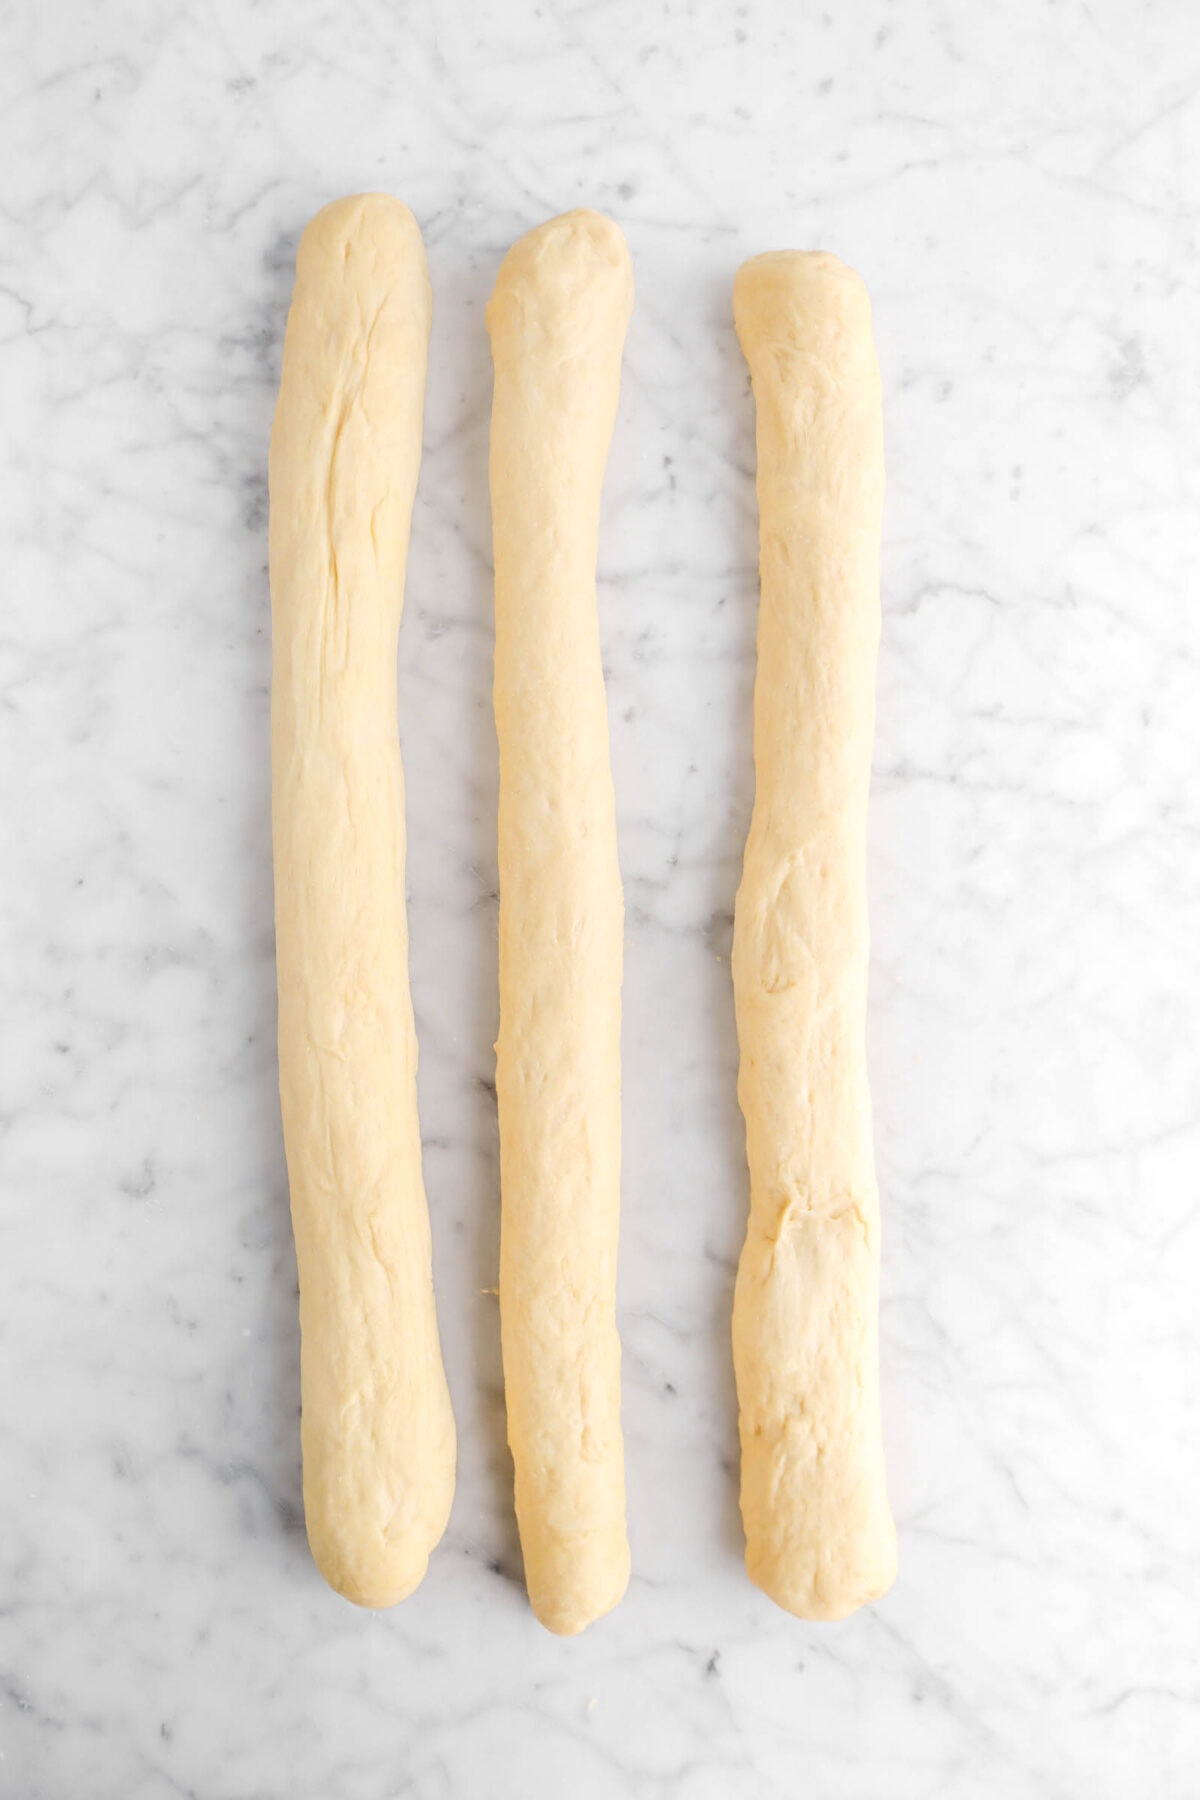 three long strands of dough on marble surface